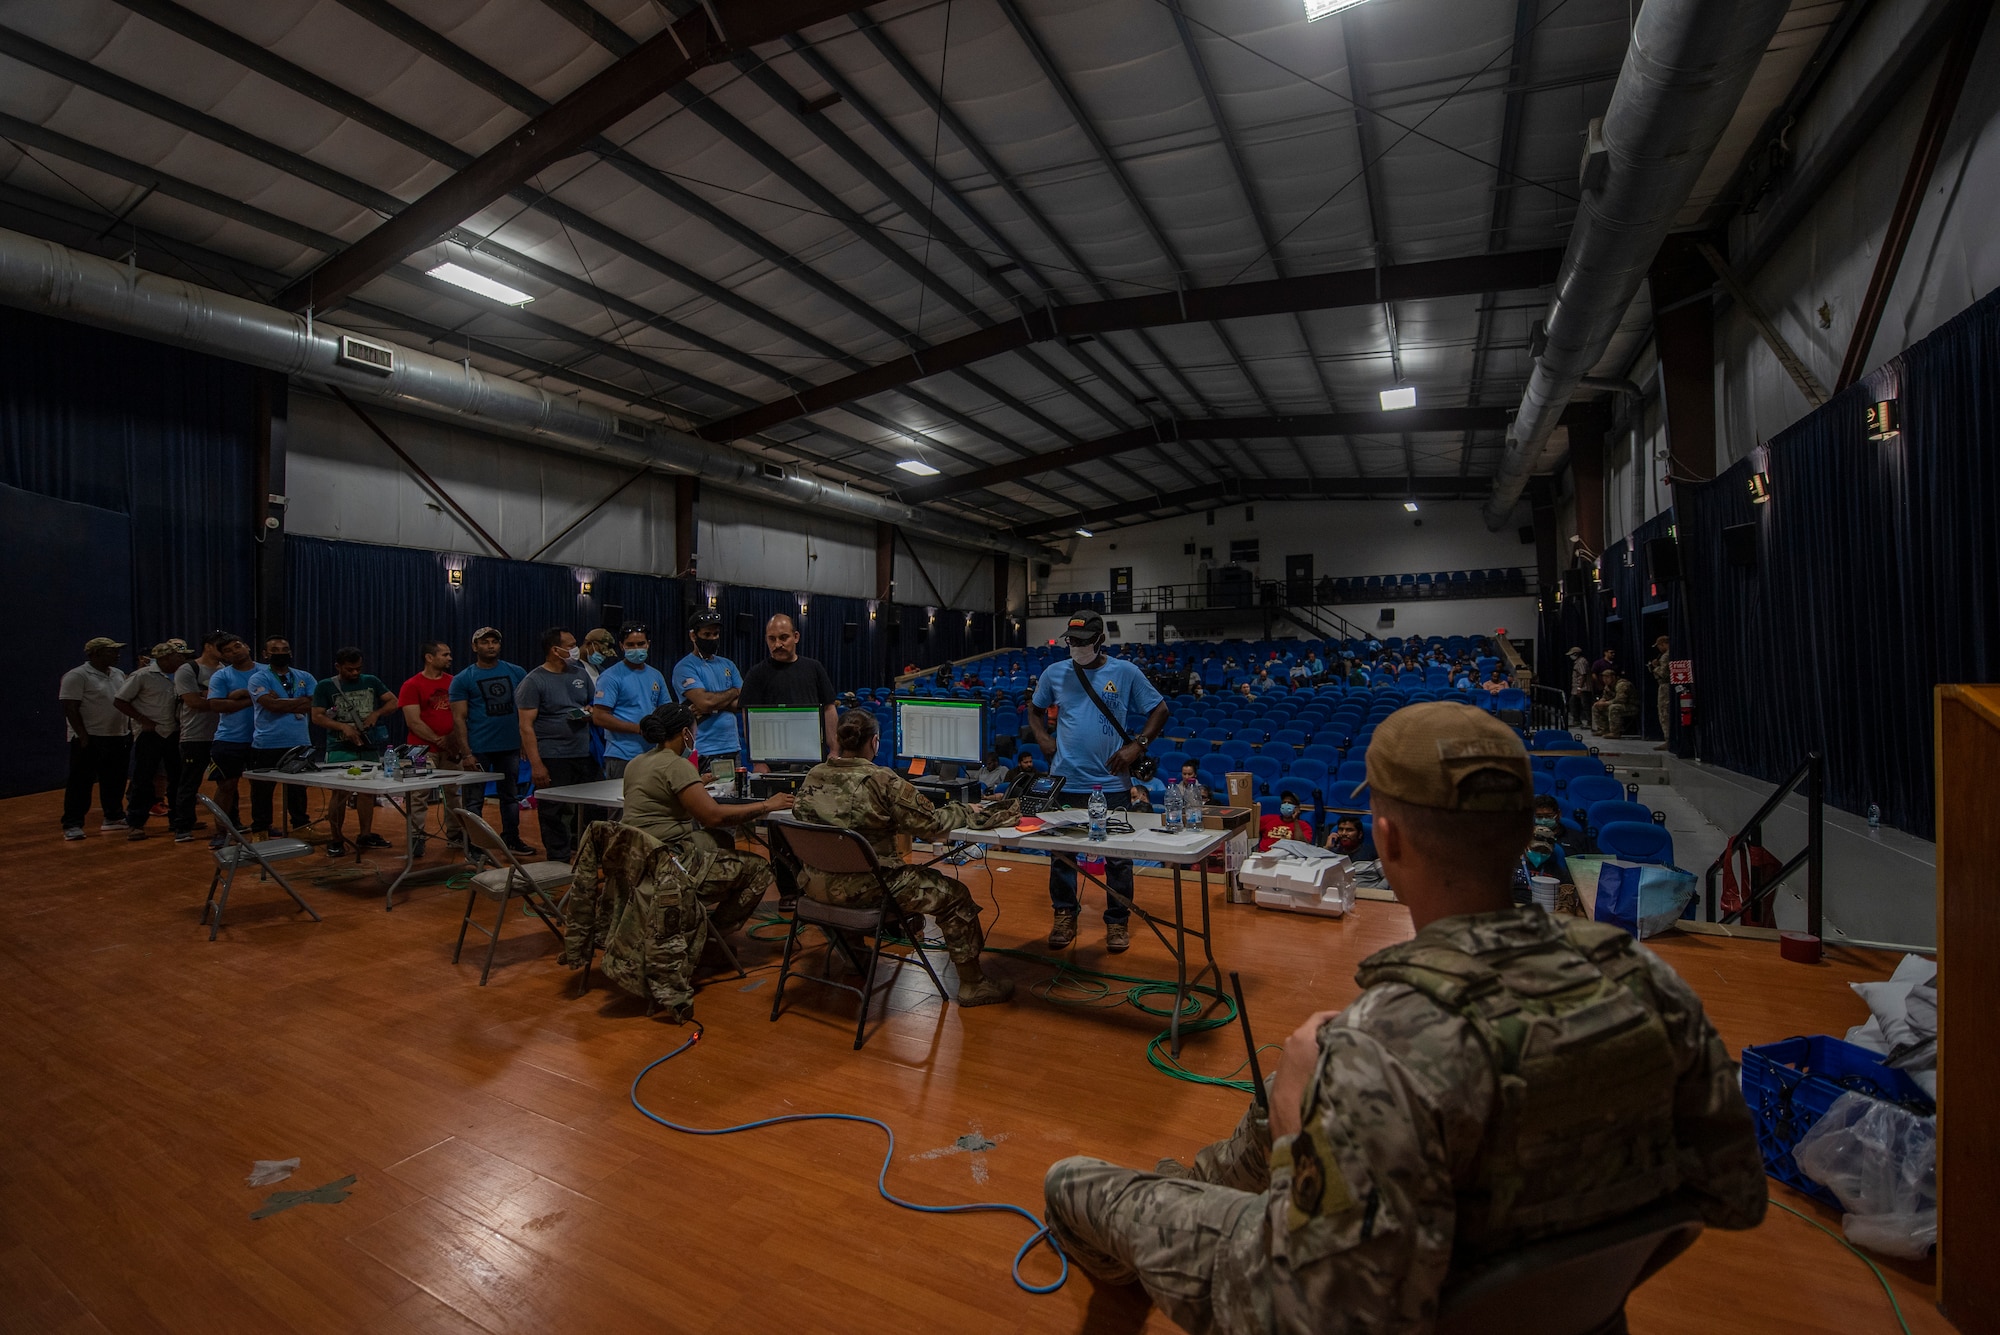 Members from the 379th Air Expeditionary Wing process Afghanistan evacuees at a camp theatre in the CENTCOM region, Aug. 20, 2021.